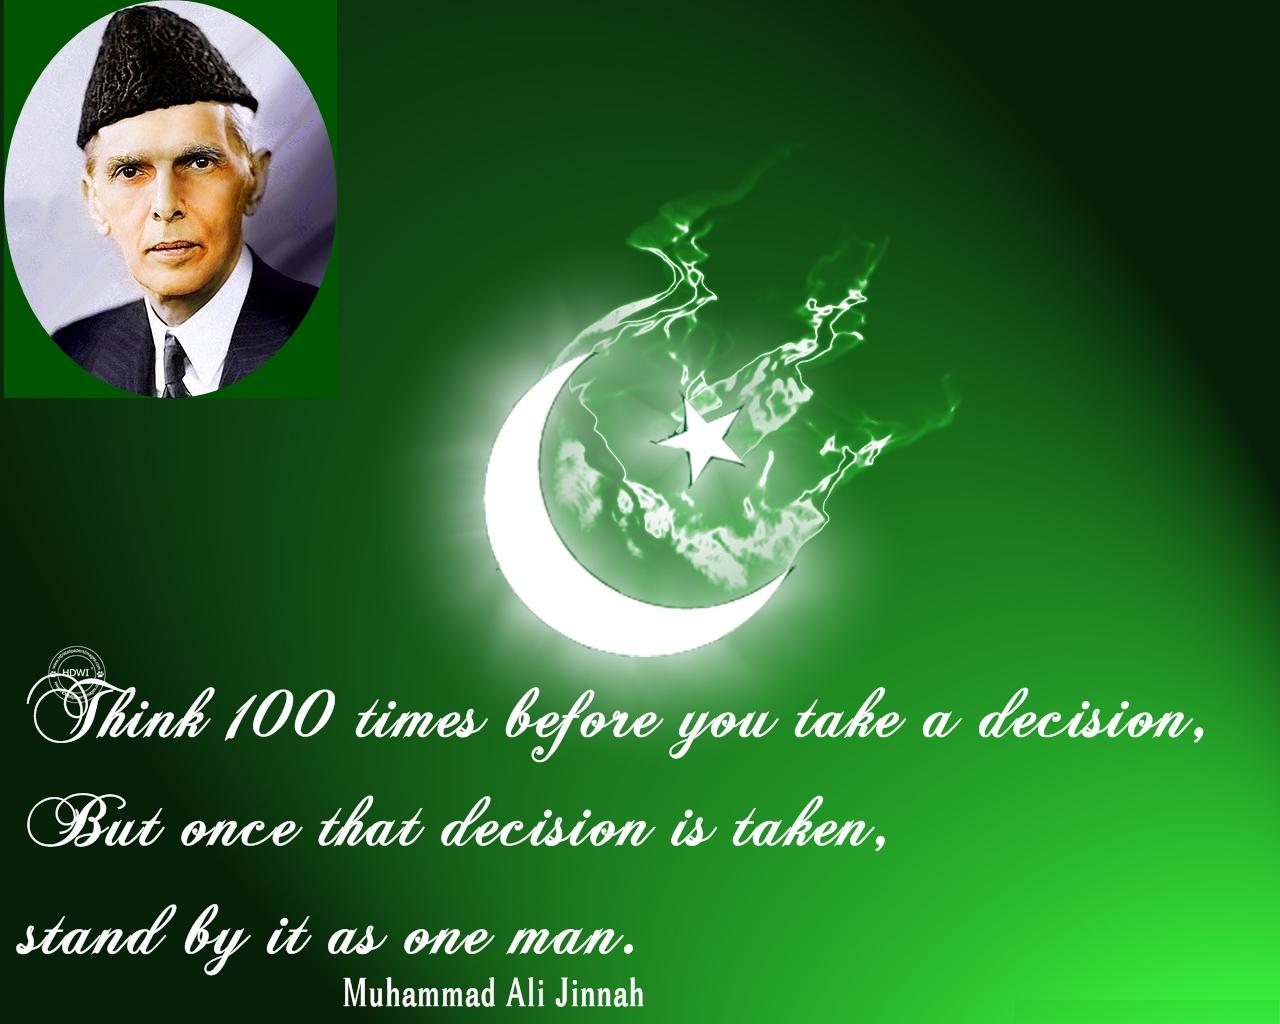 Pakistan Independence Day wishes